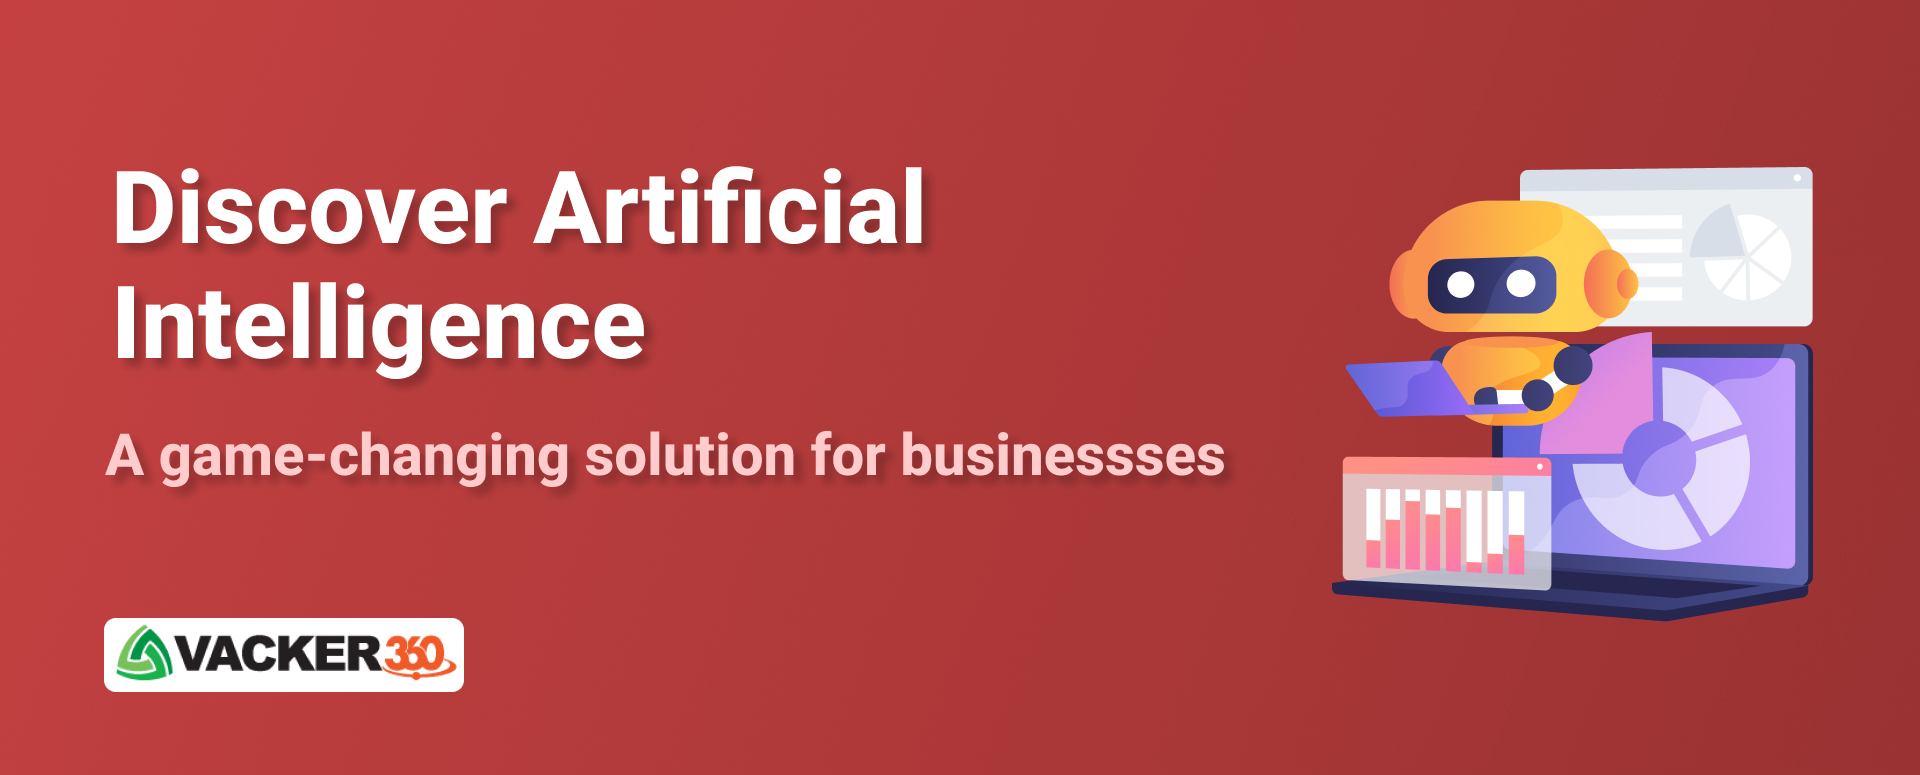 Artificial Intelligence - A Game Changing Solution for Businesses